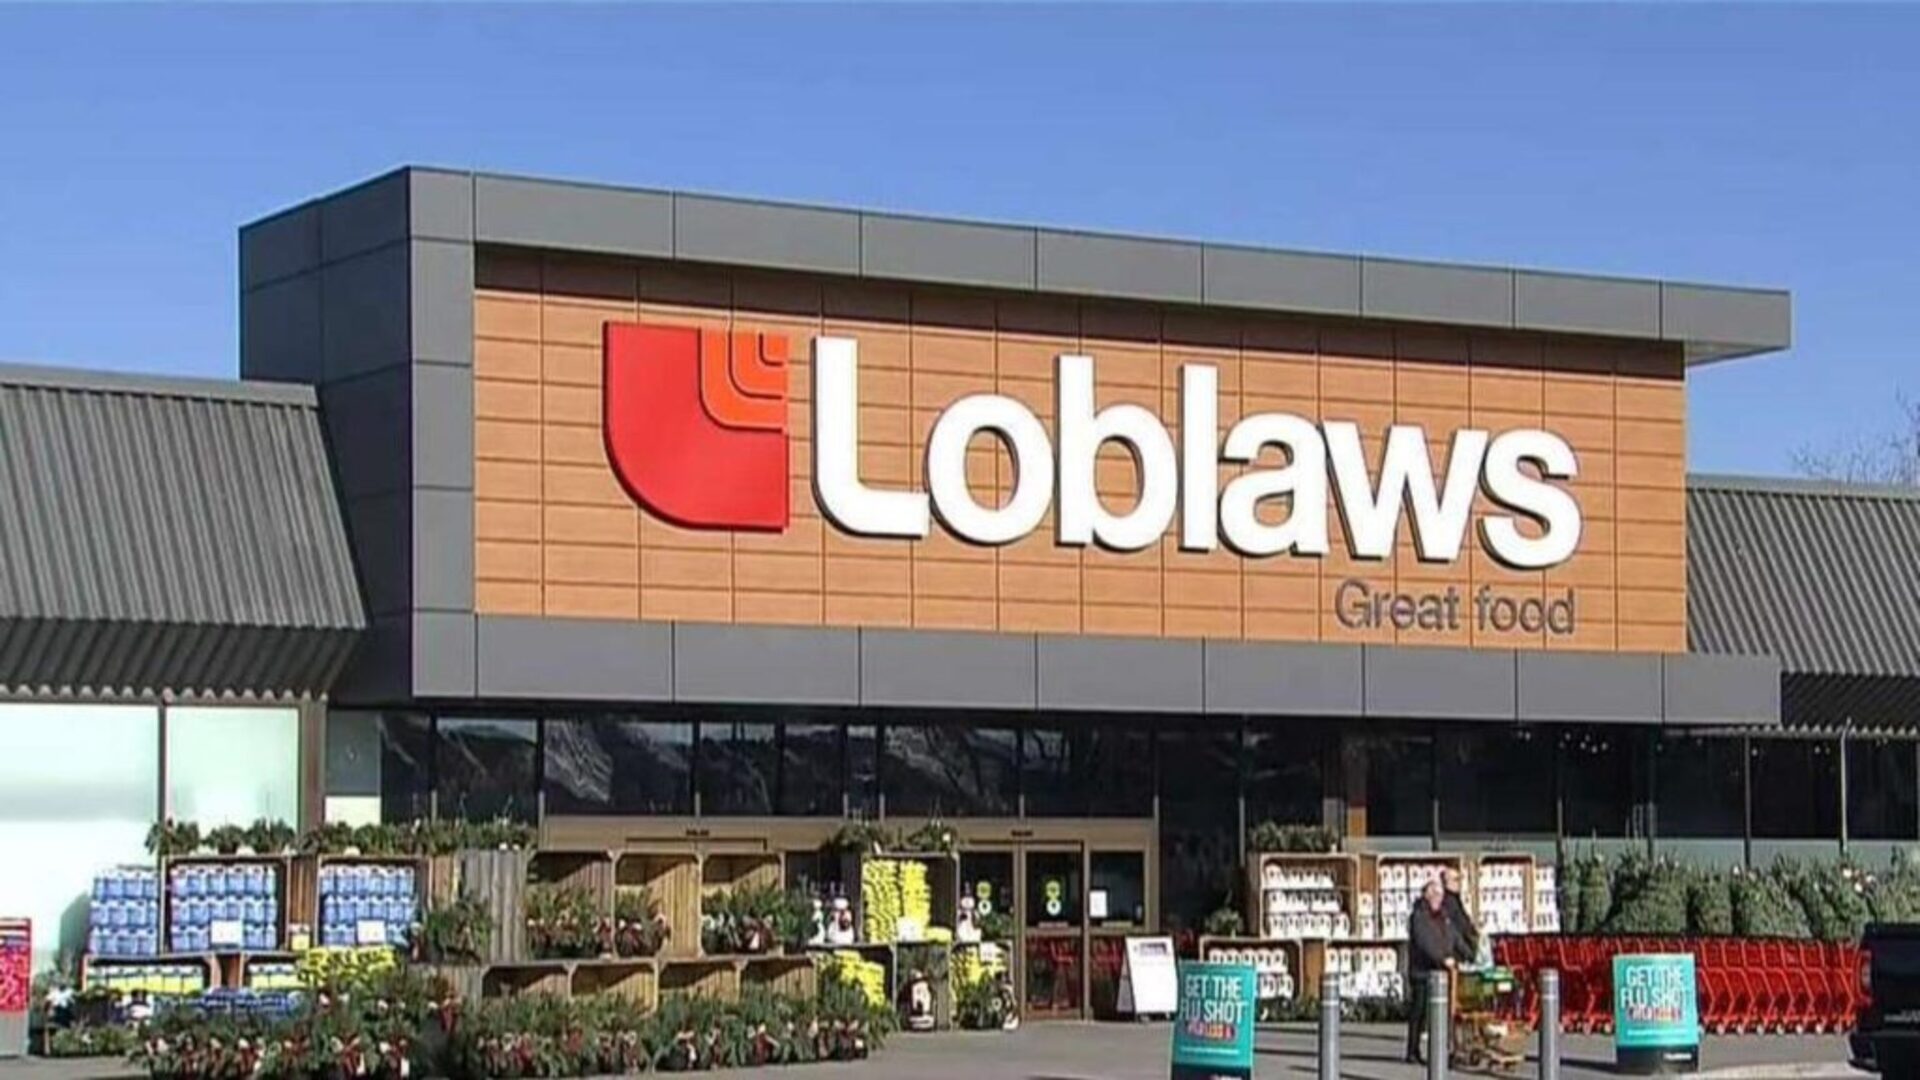 Business Report: Loblaw boycott extended by organizers